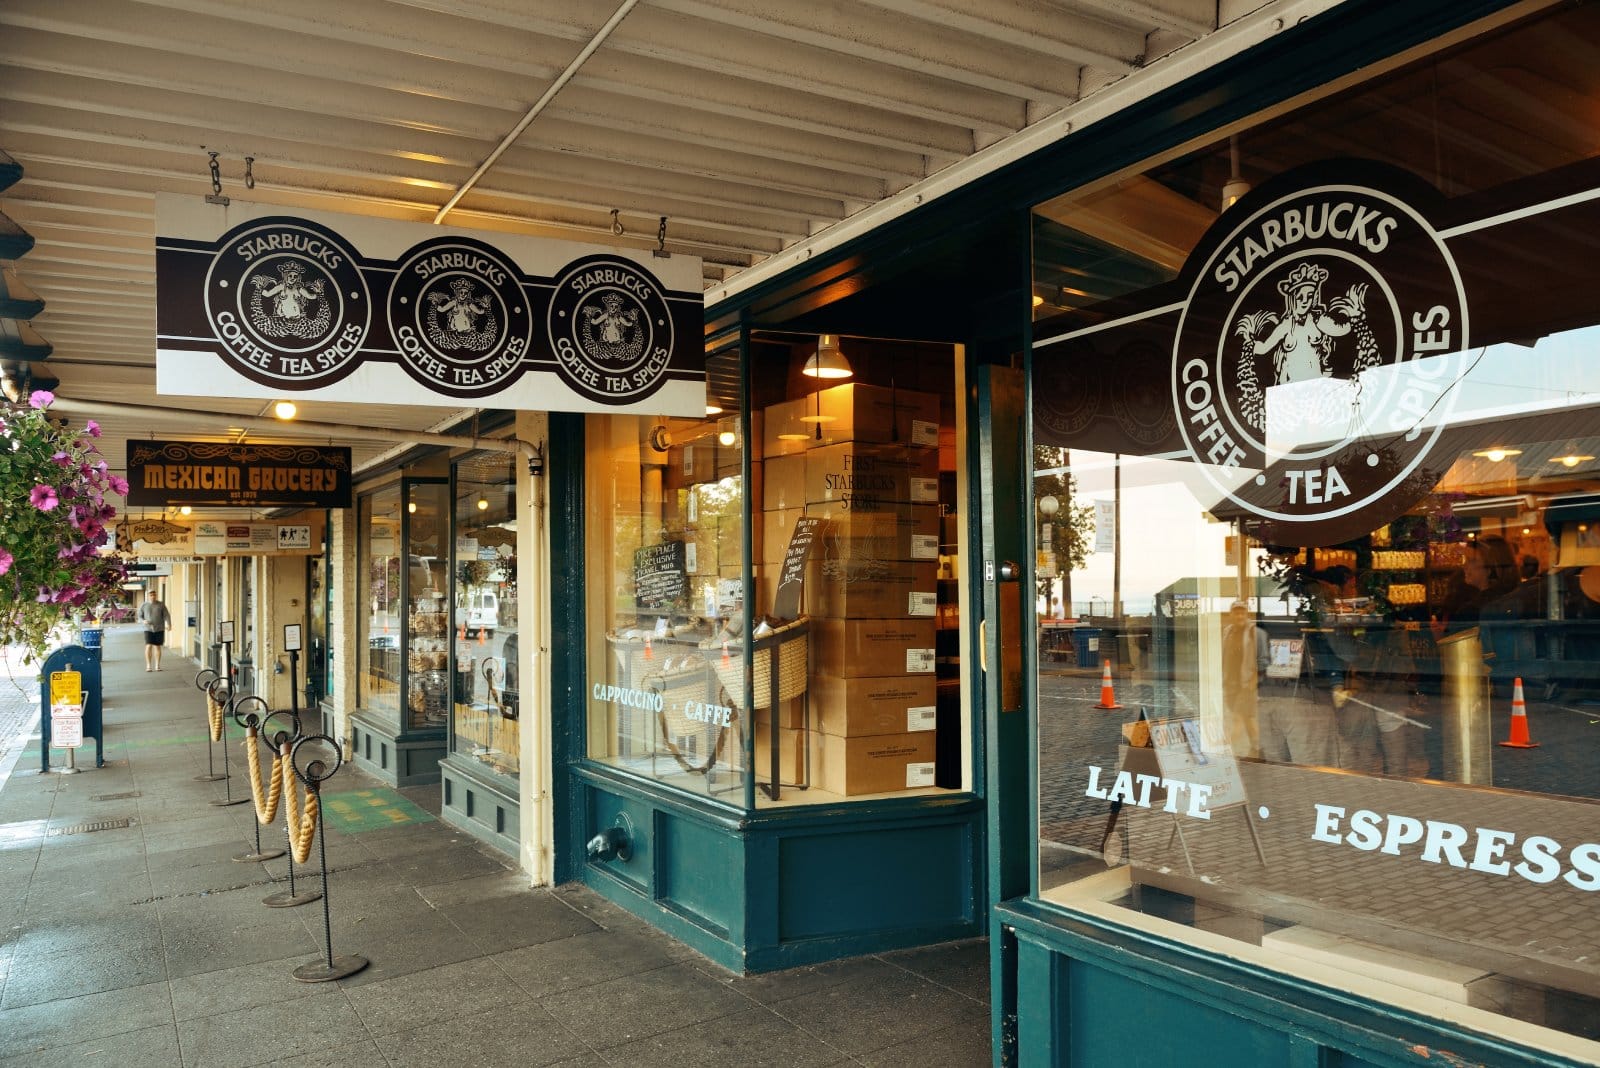 <p><span>Seattle, the birthplace of Starbucks, is at the heart of America’s modern coffee culture. This city takes its coffee seriously, with a plethora of independent coffee shops and roasters.</span></p> <p><span>The Seattle coffee scene is characterized by its emphasis on ethically sourced beans and artisanal brewing techniques. Visiting Seattle offers an insight into the American coffee revolution and its impact on global coffee culture.</span></p> <p><b>Insider’s Tip: </b><span>For a unique experience, visit the Starbucks Reserve Roastery, where you can witness the roasting process and try exclusive brews.</span></p> <p><b>When To Travel: </b><span>The best time to visit Seattle is from May to October, when the weather is mild and dry.</span></p> <p><b>How To Get There: </b><span>Seattle-Tacoma International Airport is the main gateway, with various transportation options available to the city.</span></p>